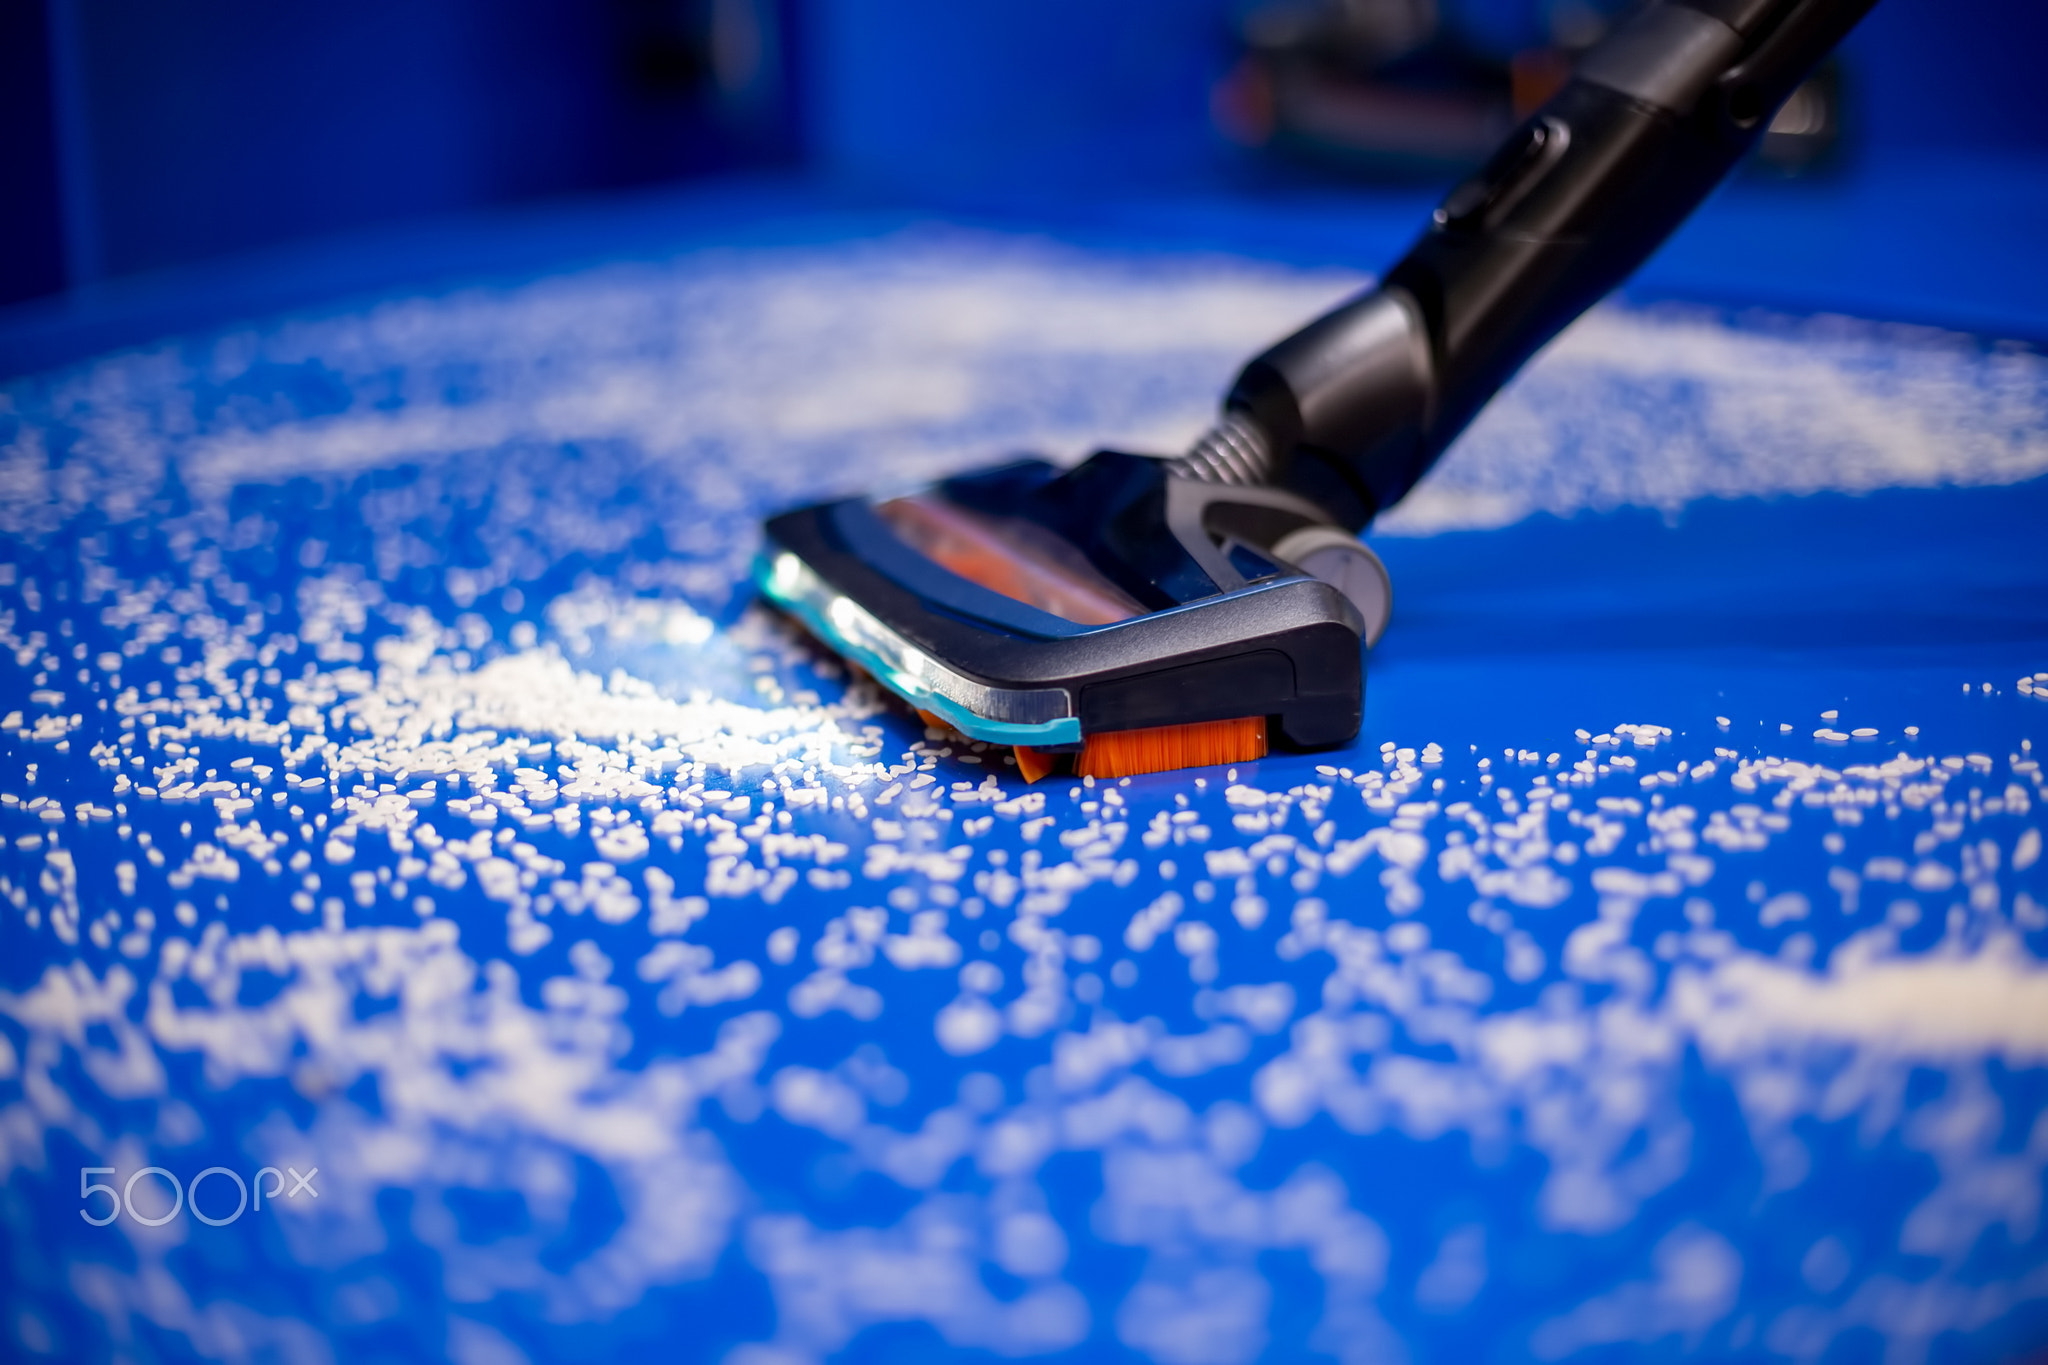 a new vacuum cleaner with wet cleaning and LEDs cleans the blue floor